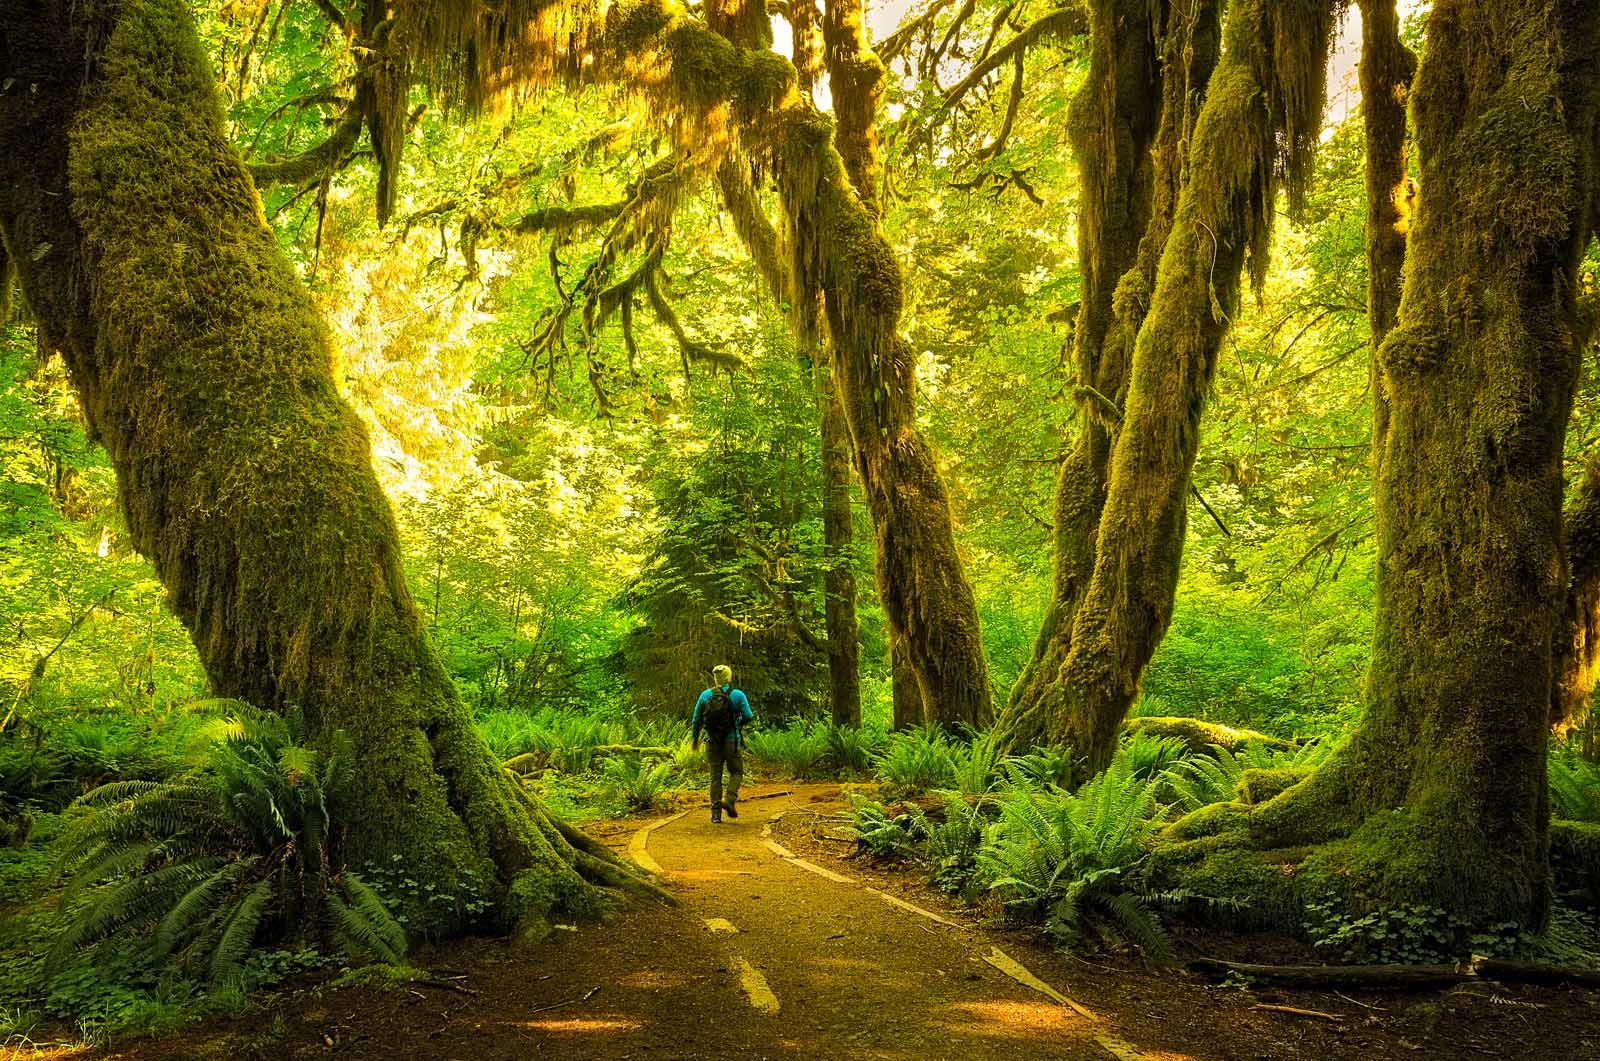 Best Hikes in Olympic National Park